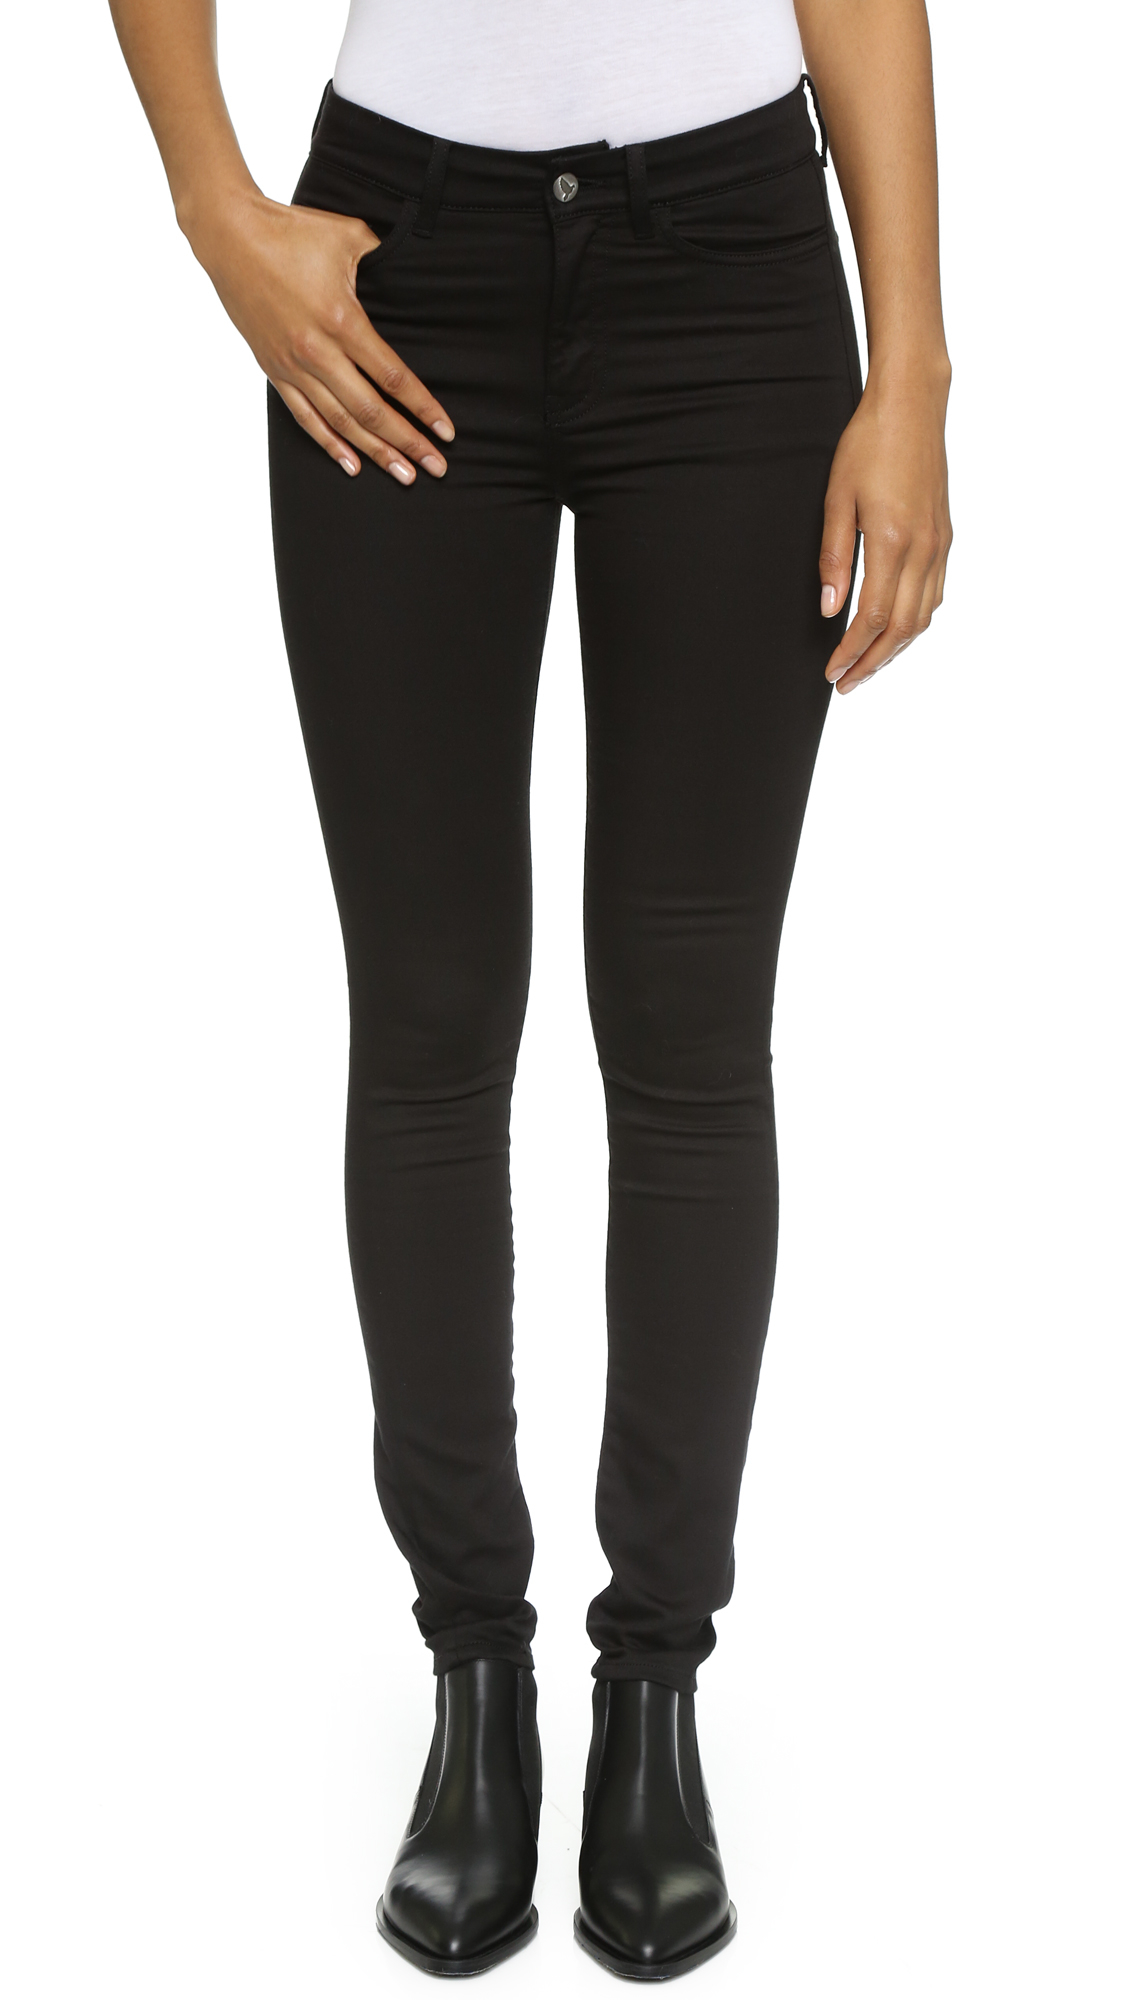 Lyst - M.I.H Jeans The Bodycon Skinny Jeans - Power Black in Black